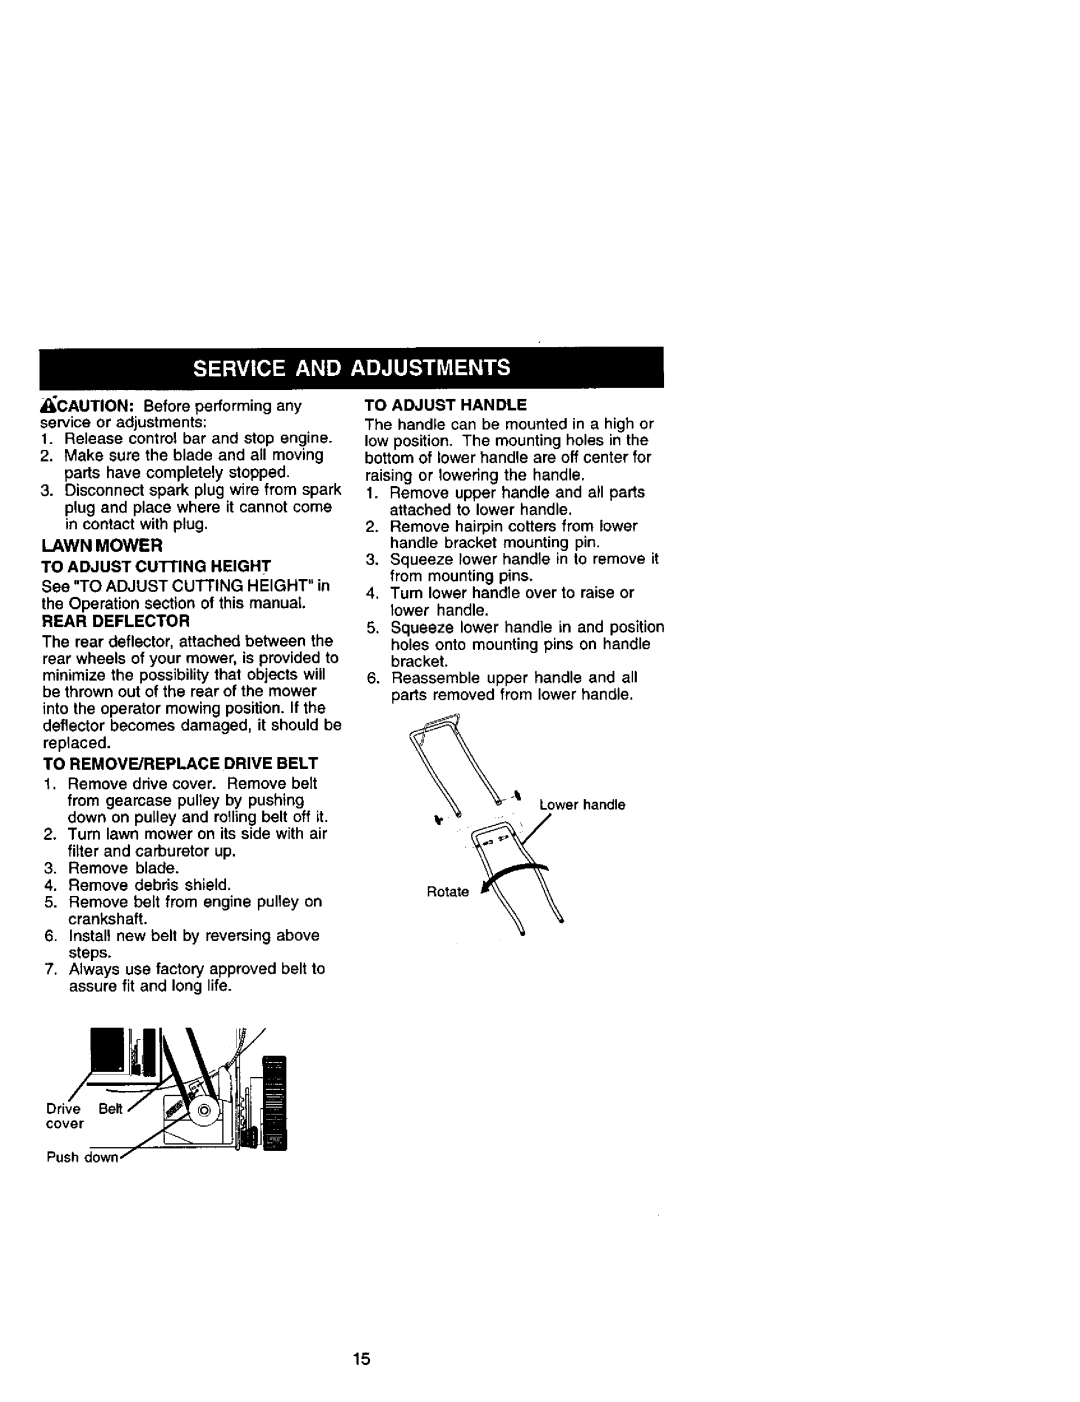 Craftsman 917.37945 owner manual LAWN MOWER TO ADJUST cunING HEIGHT 